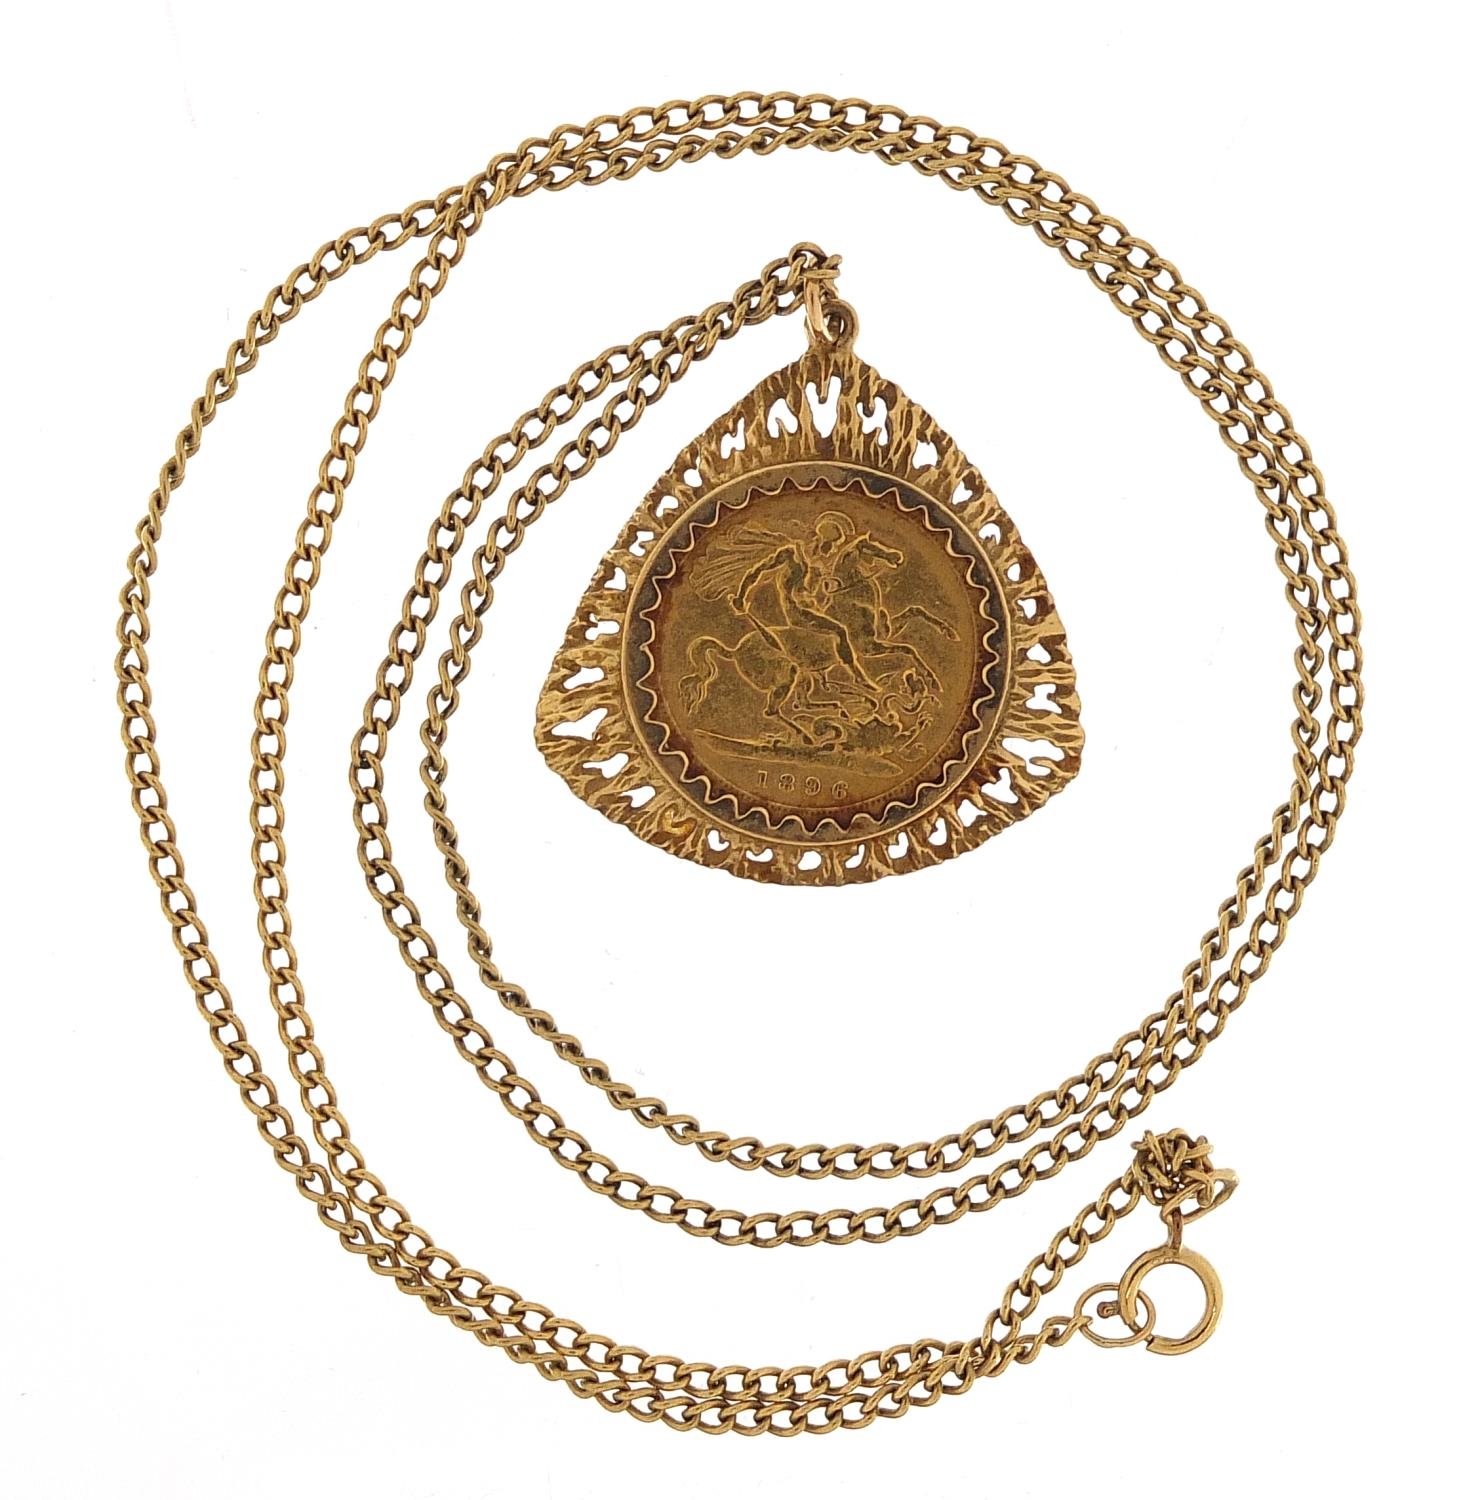 Victorian 1896 gold half sovereign with 9ct gold pendant mount and 9ct gold necklace, 3.5cm high and - Image 2 of 3